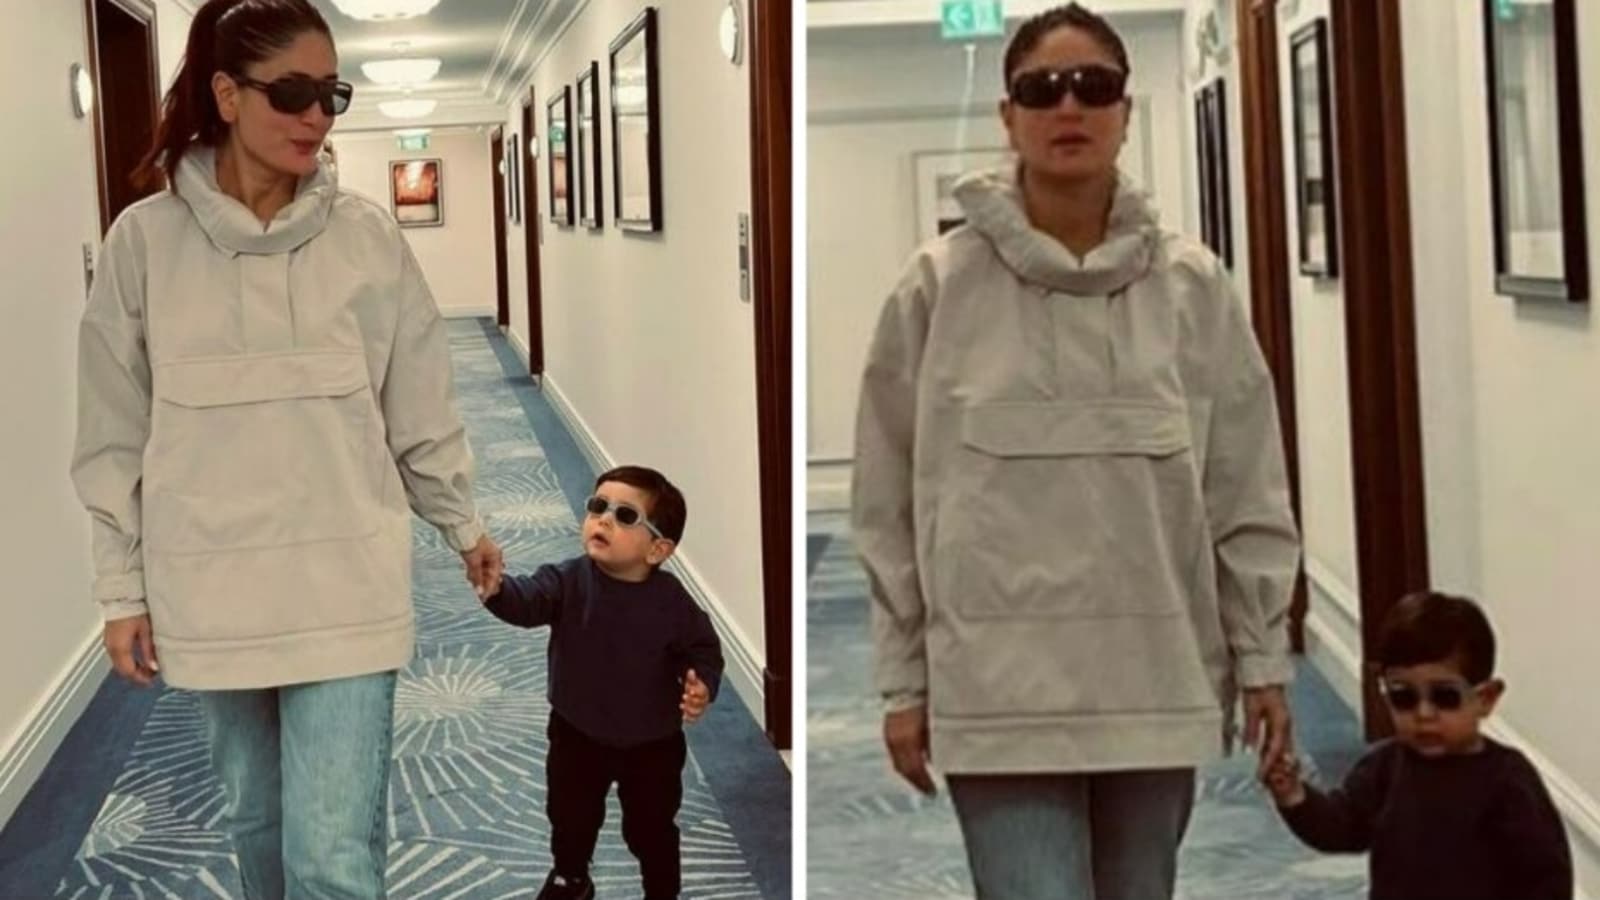 kareena-kapoor-and-jehangir-are-the-coolest-mom-and-son-duo-in-new-pics-from-london-alia-bhatt-calls-them-superstars